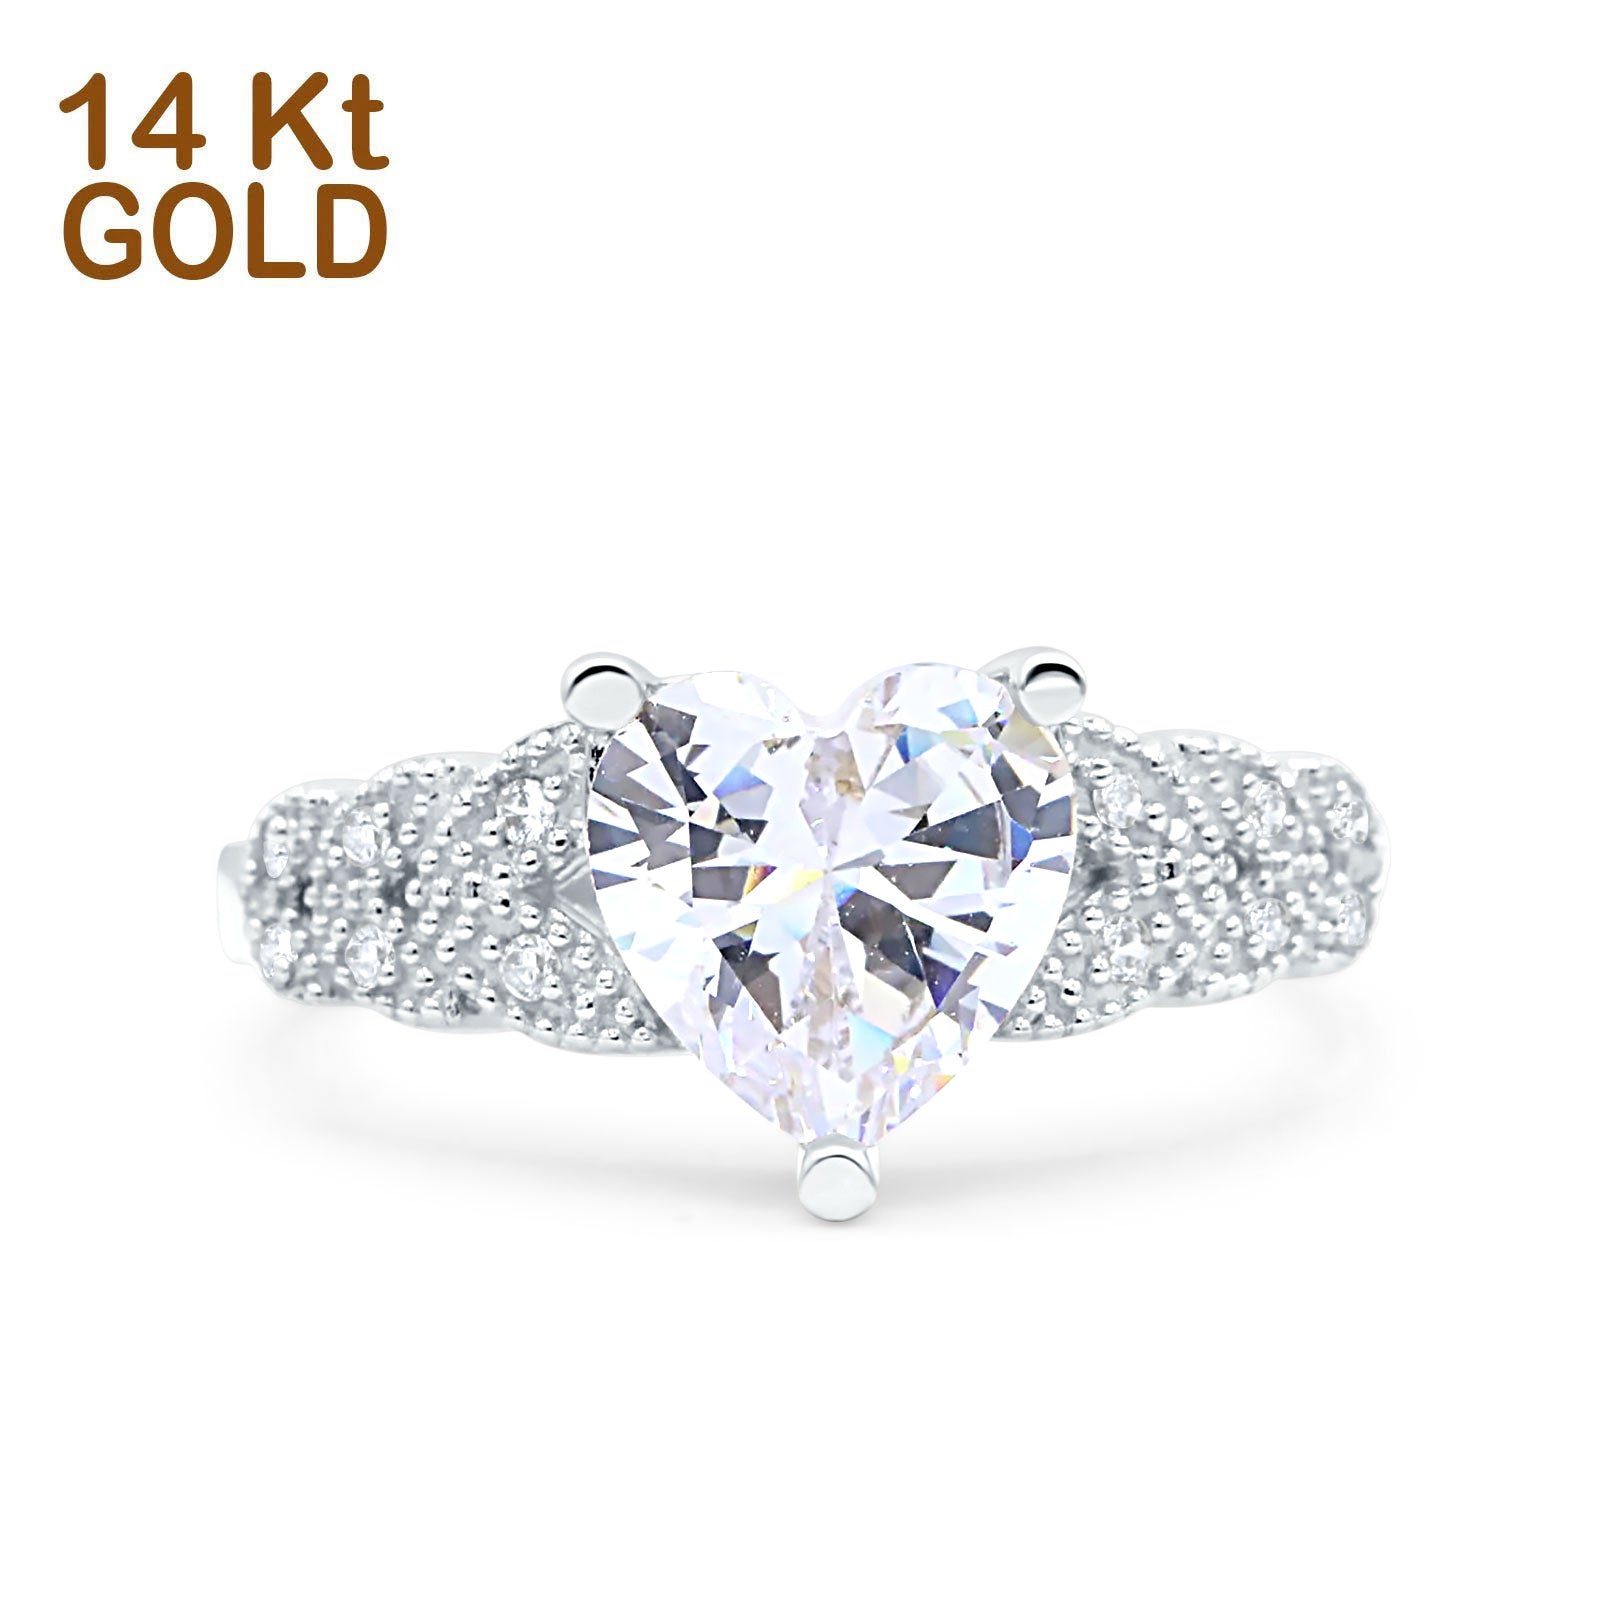 14K Gold Art Deco Vintage Marquise Shape Solid Bridal Simulated Cubic Zirconia Wedding Engagement Ring